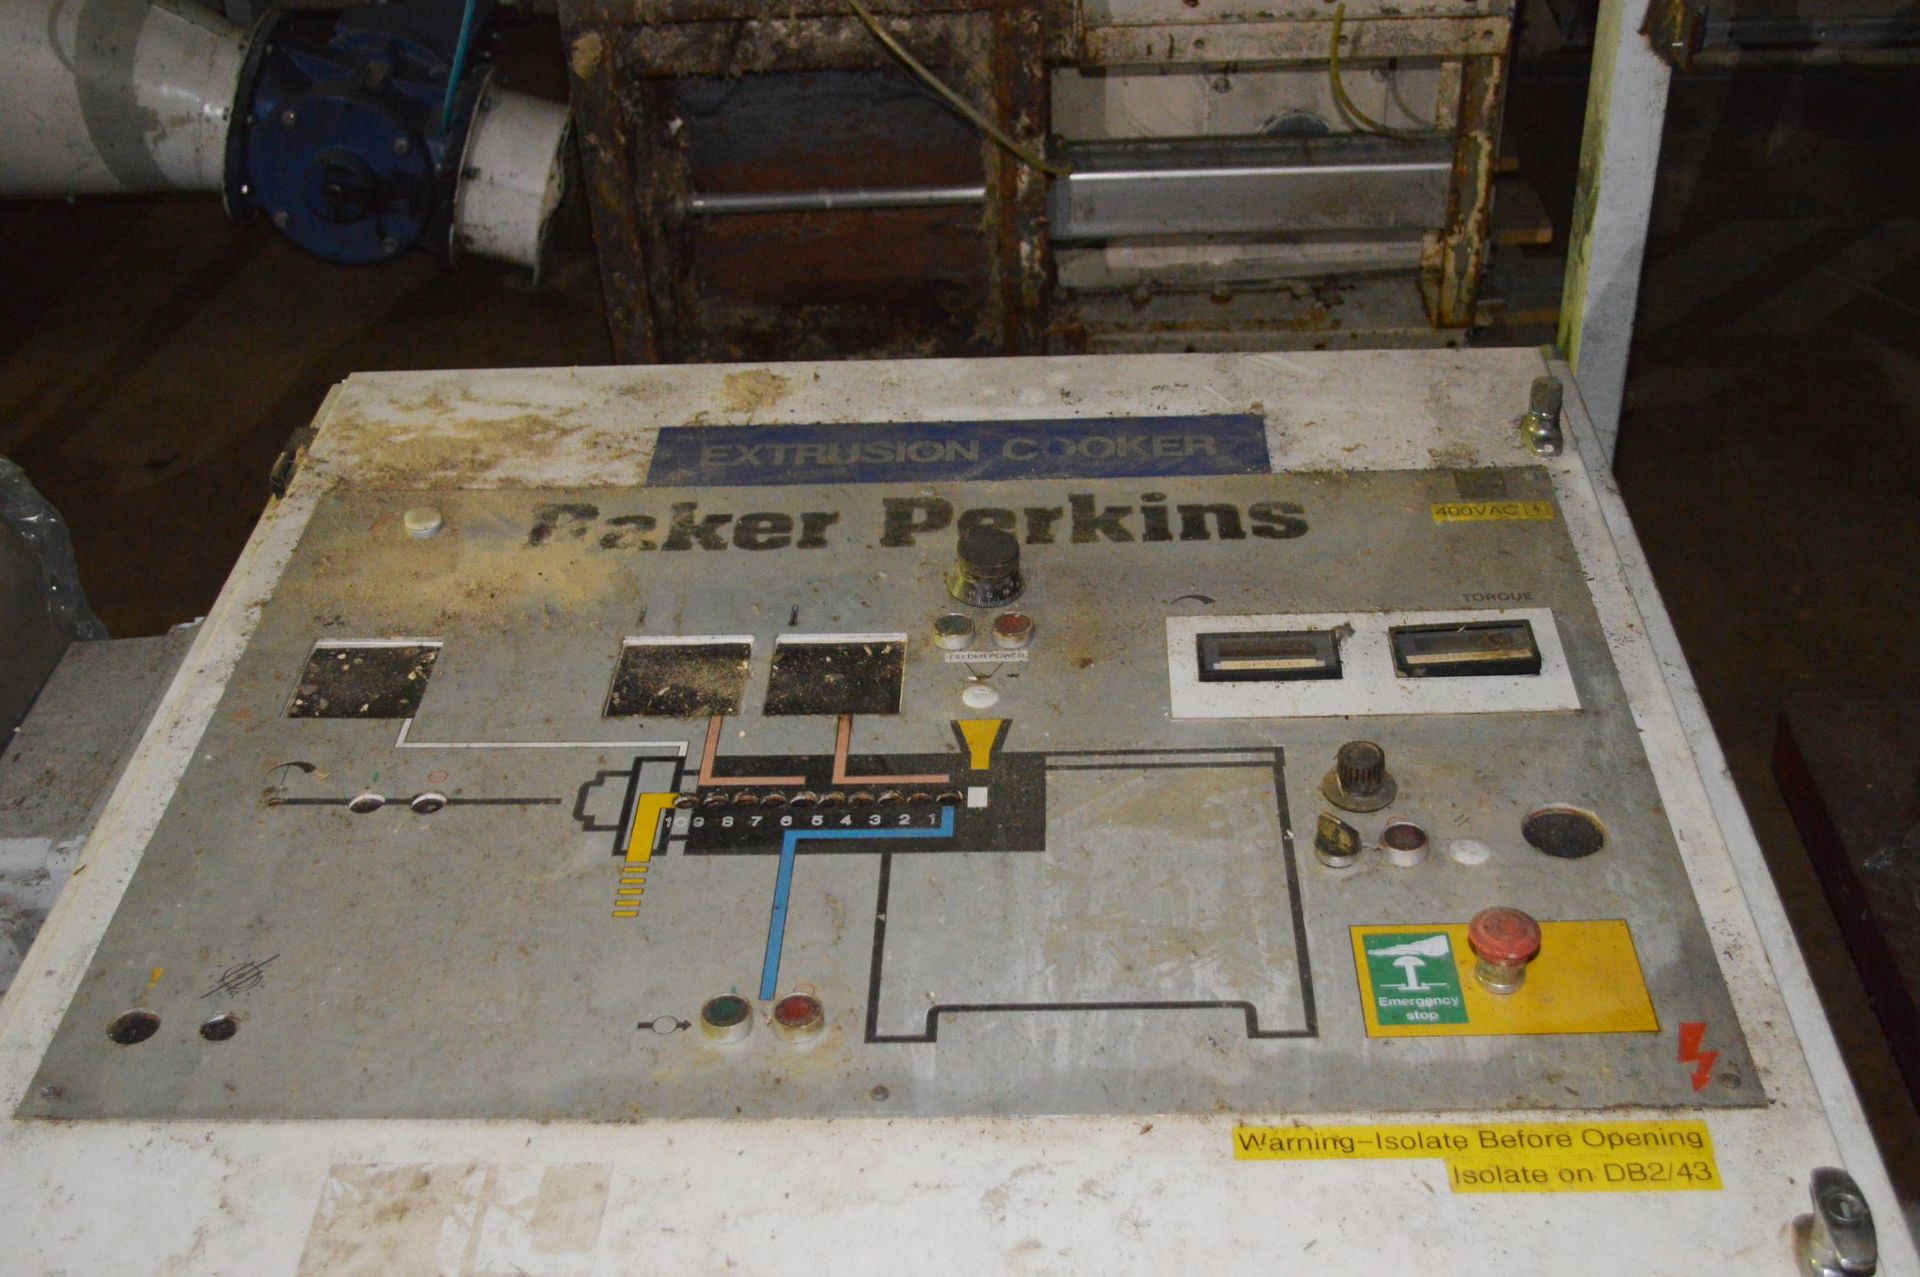 Baker Perkins EXTRUSION COOKER PILOT PLANT, with c - Image 19 of 23